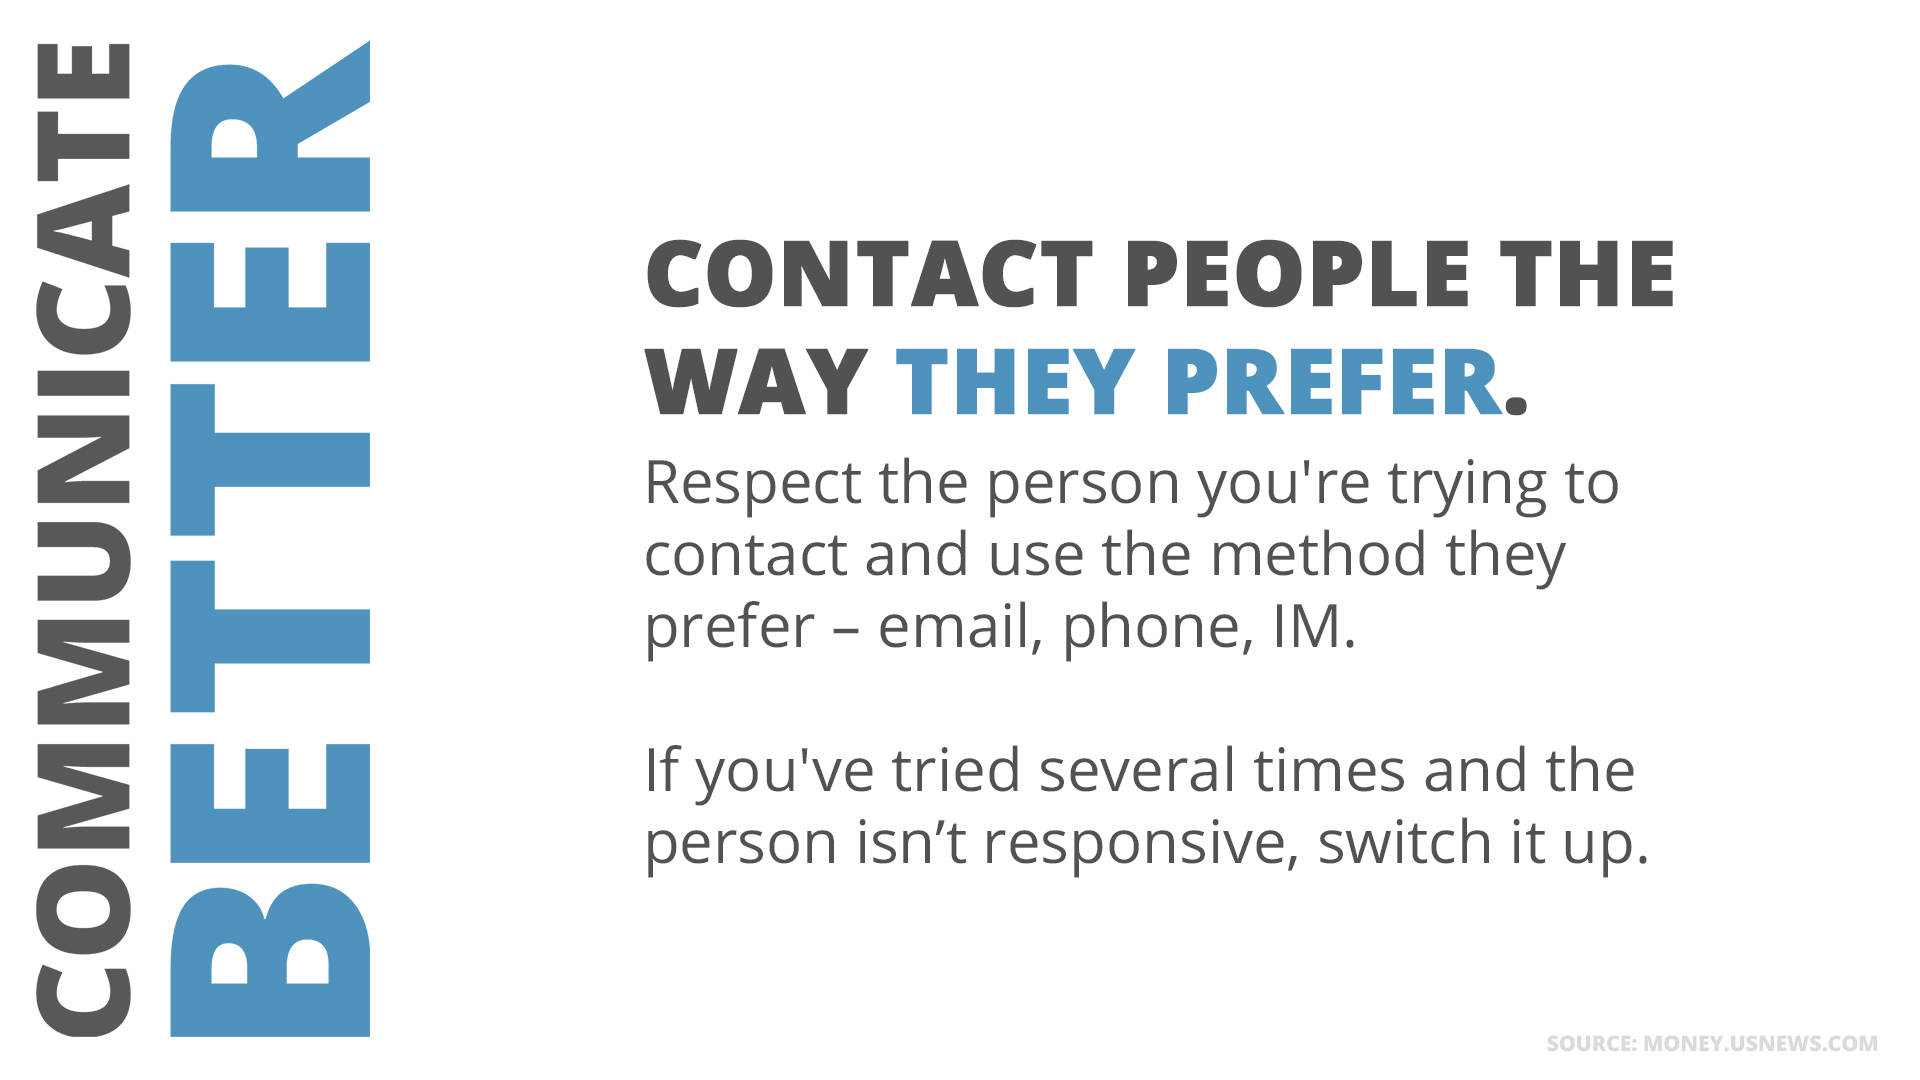 Free Graphic | Communicate Better | Contact People the Way They Prefer